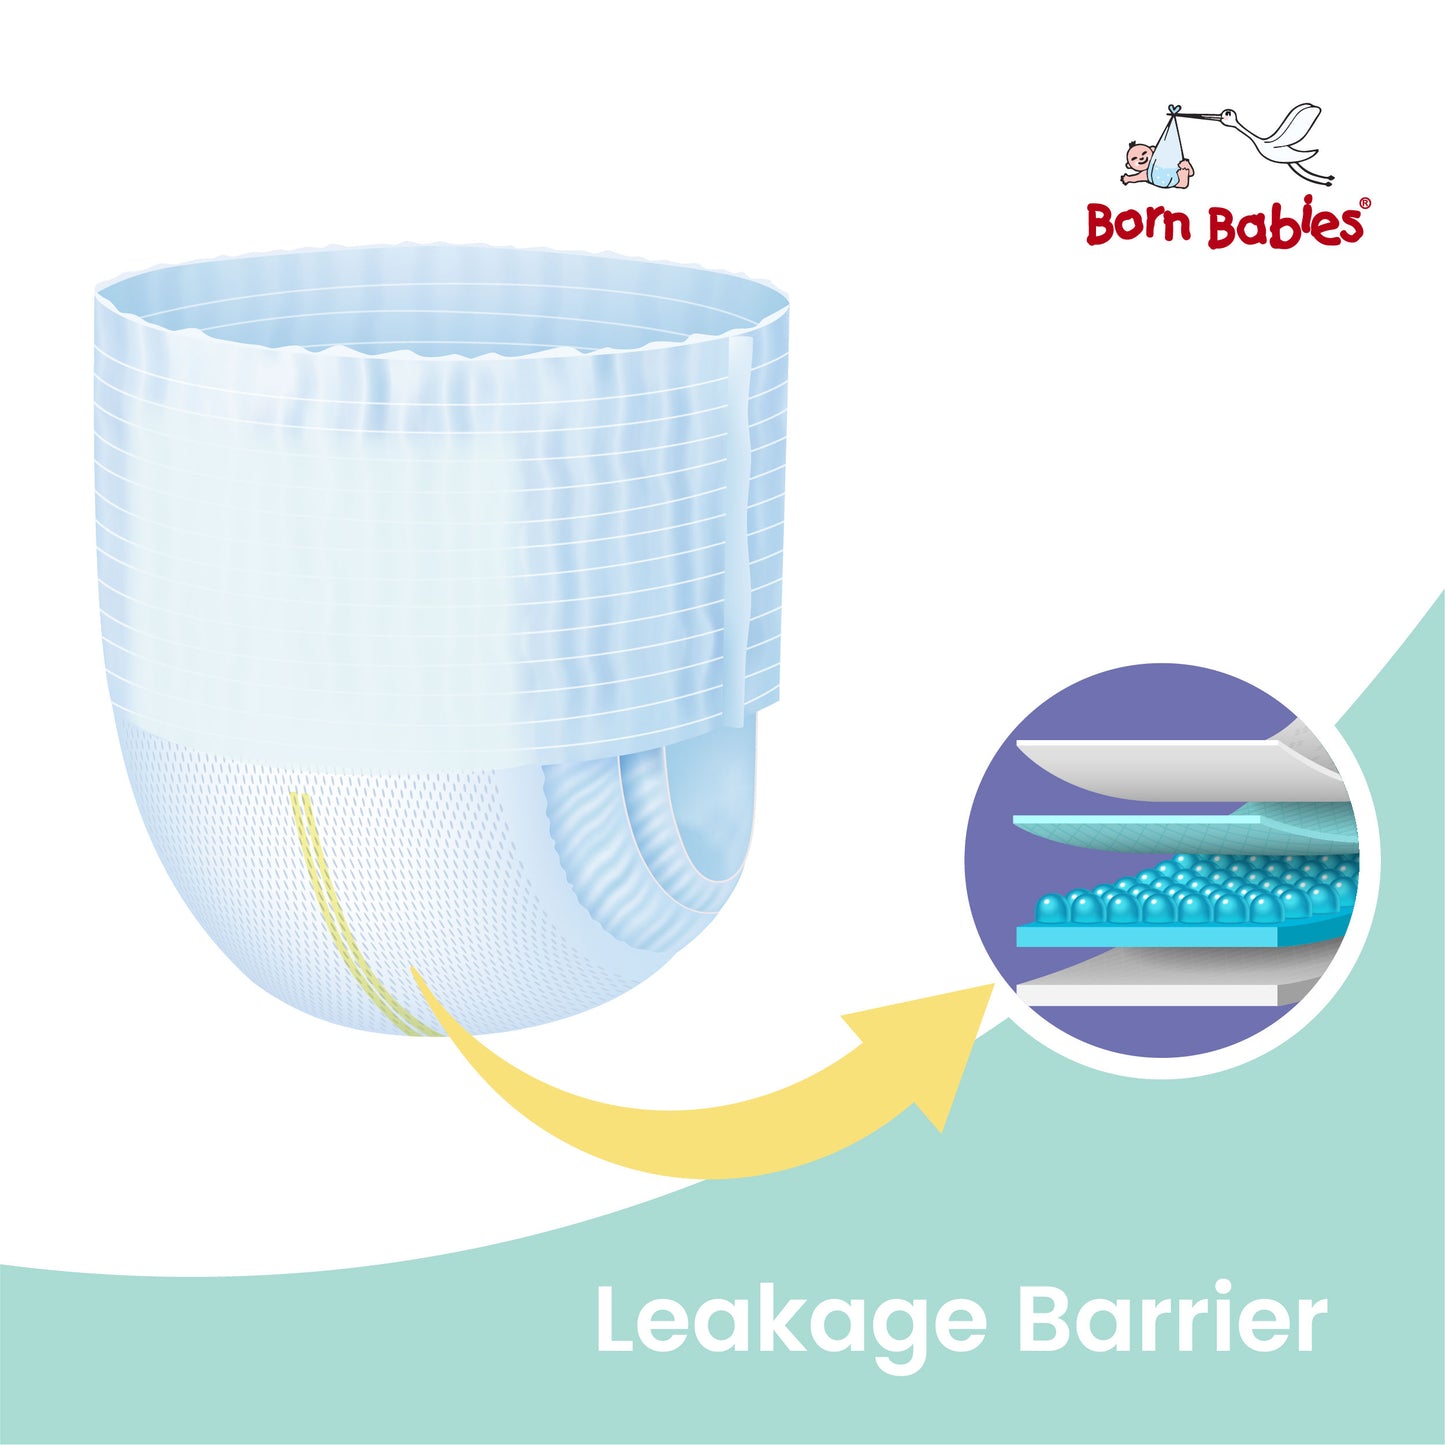 Born Babies Baby Diaper Pant Three Layer Leakage Protection High Absorb (Per Pack 20 Pieces)